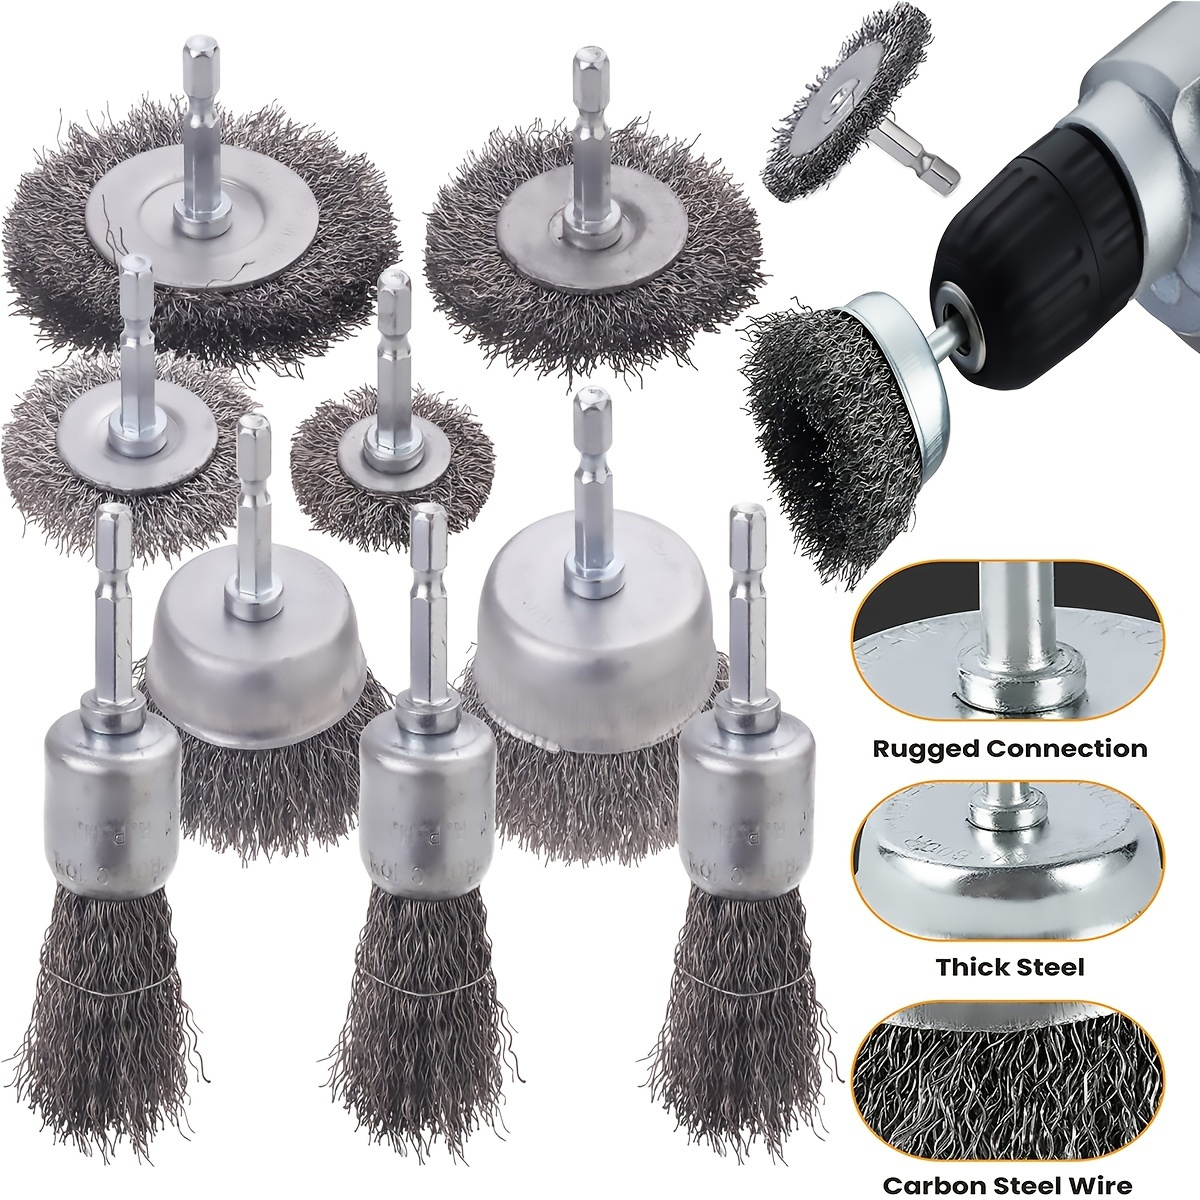 TILAX 3 Inch Wire Cup Brush End Brush Set 3 Piece, Wire Brush for Drill 1/4  Inch Hex Shank Arbor 0.012 Brass Coated Crimped and 0.019 Carbon Steel